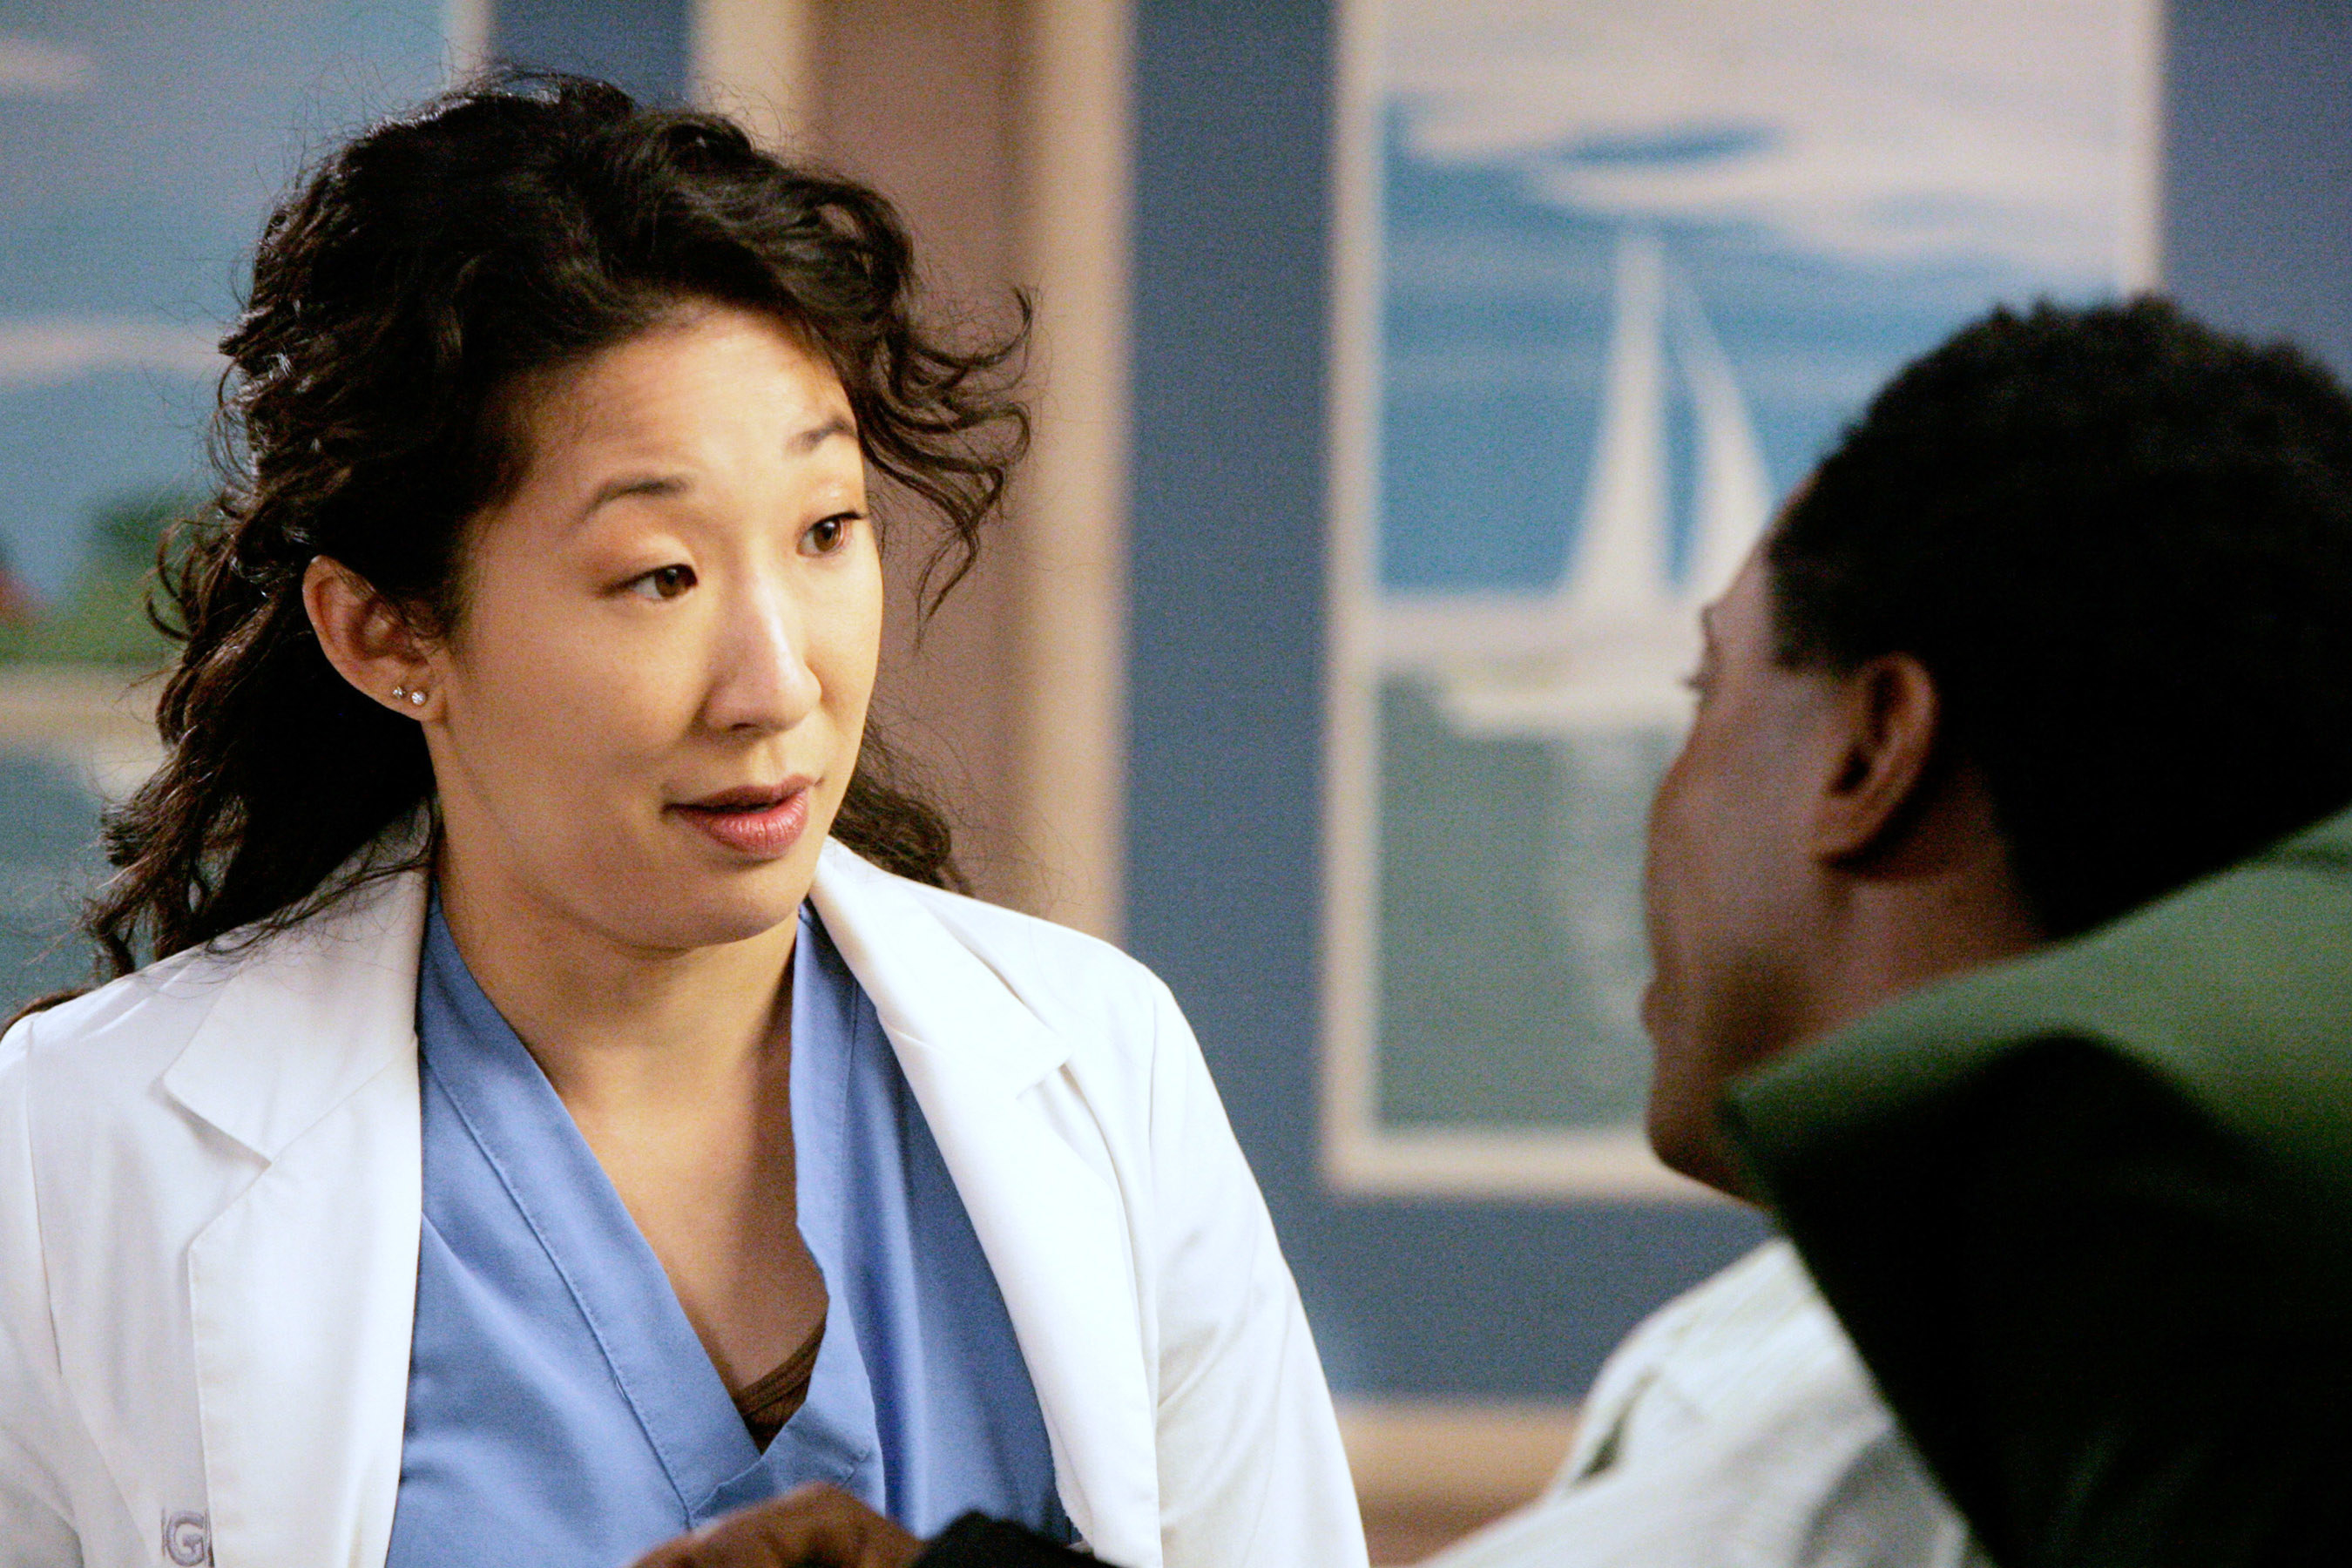 Cristina speaks to a patient